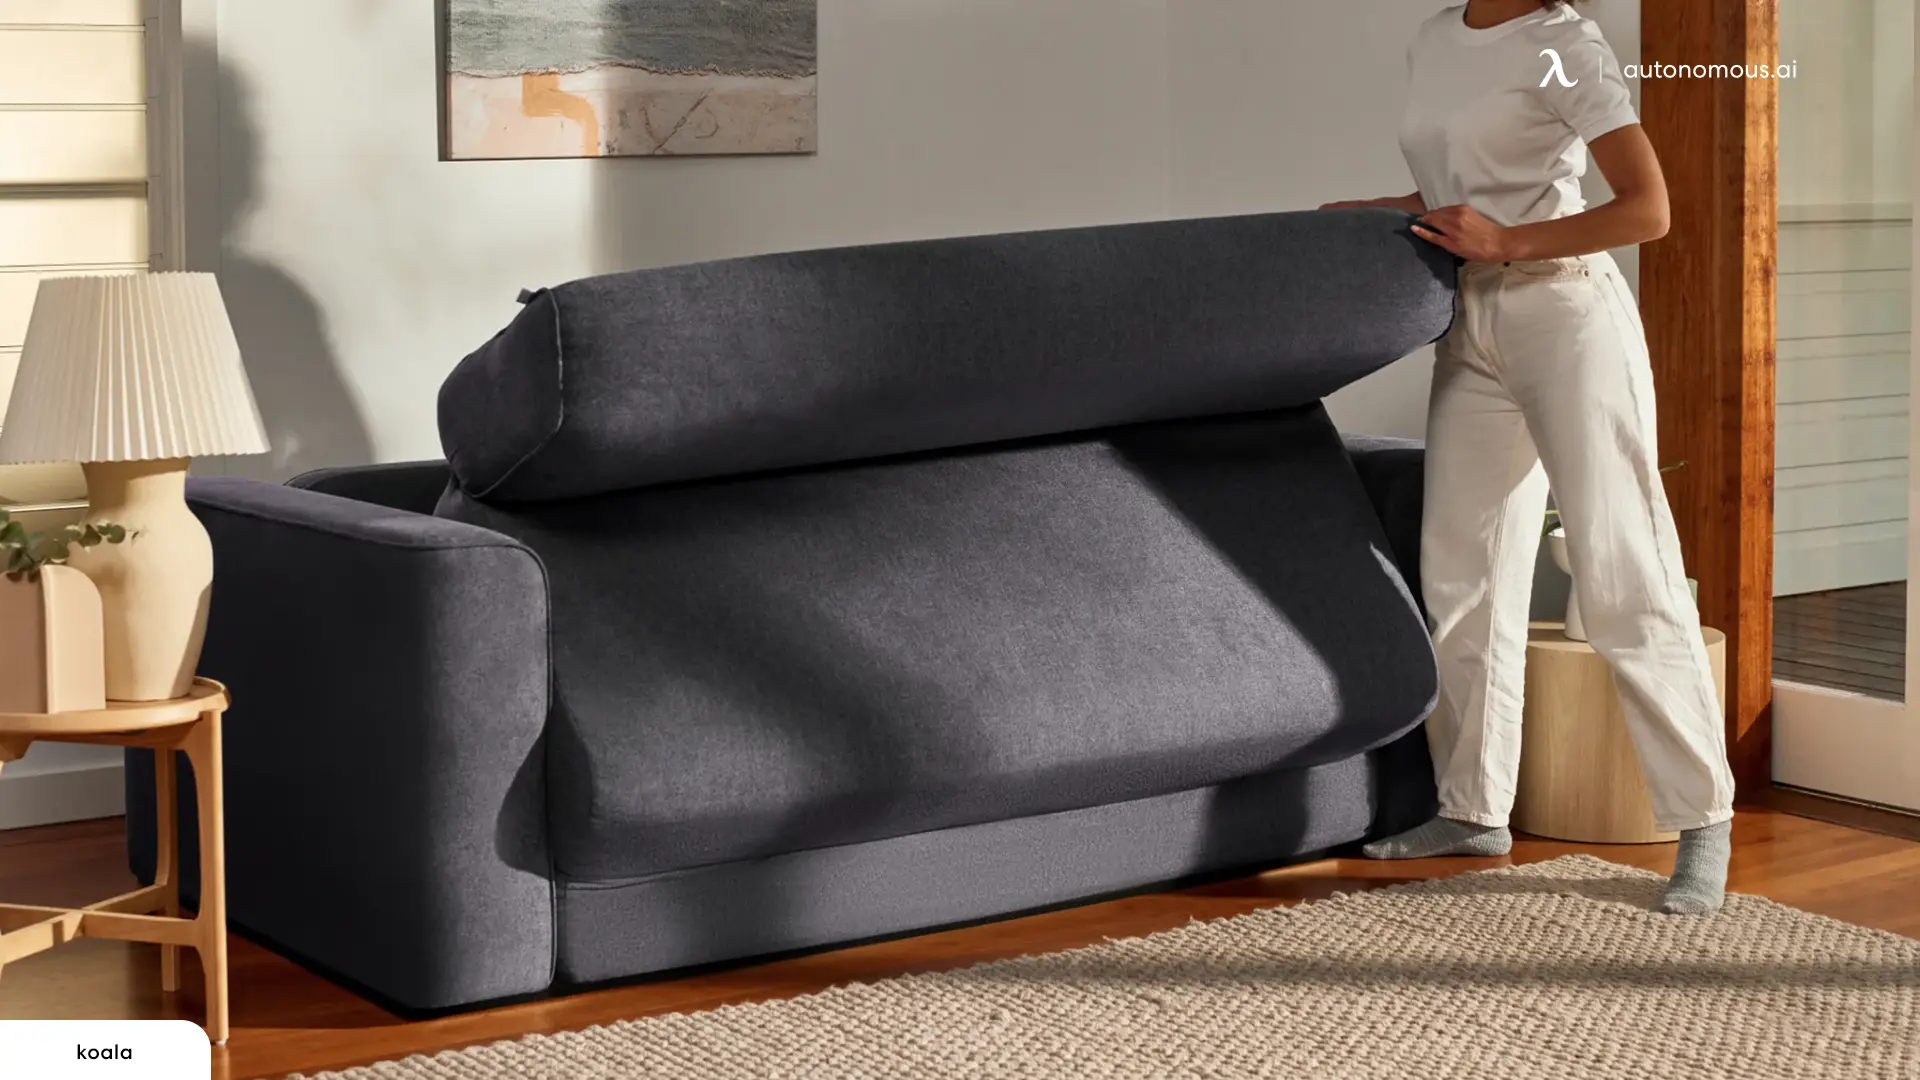 Foldable Sofas - guest sleeping solutions